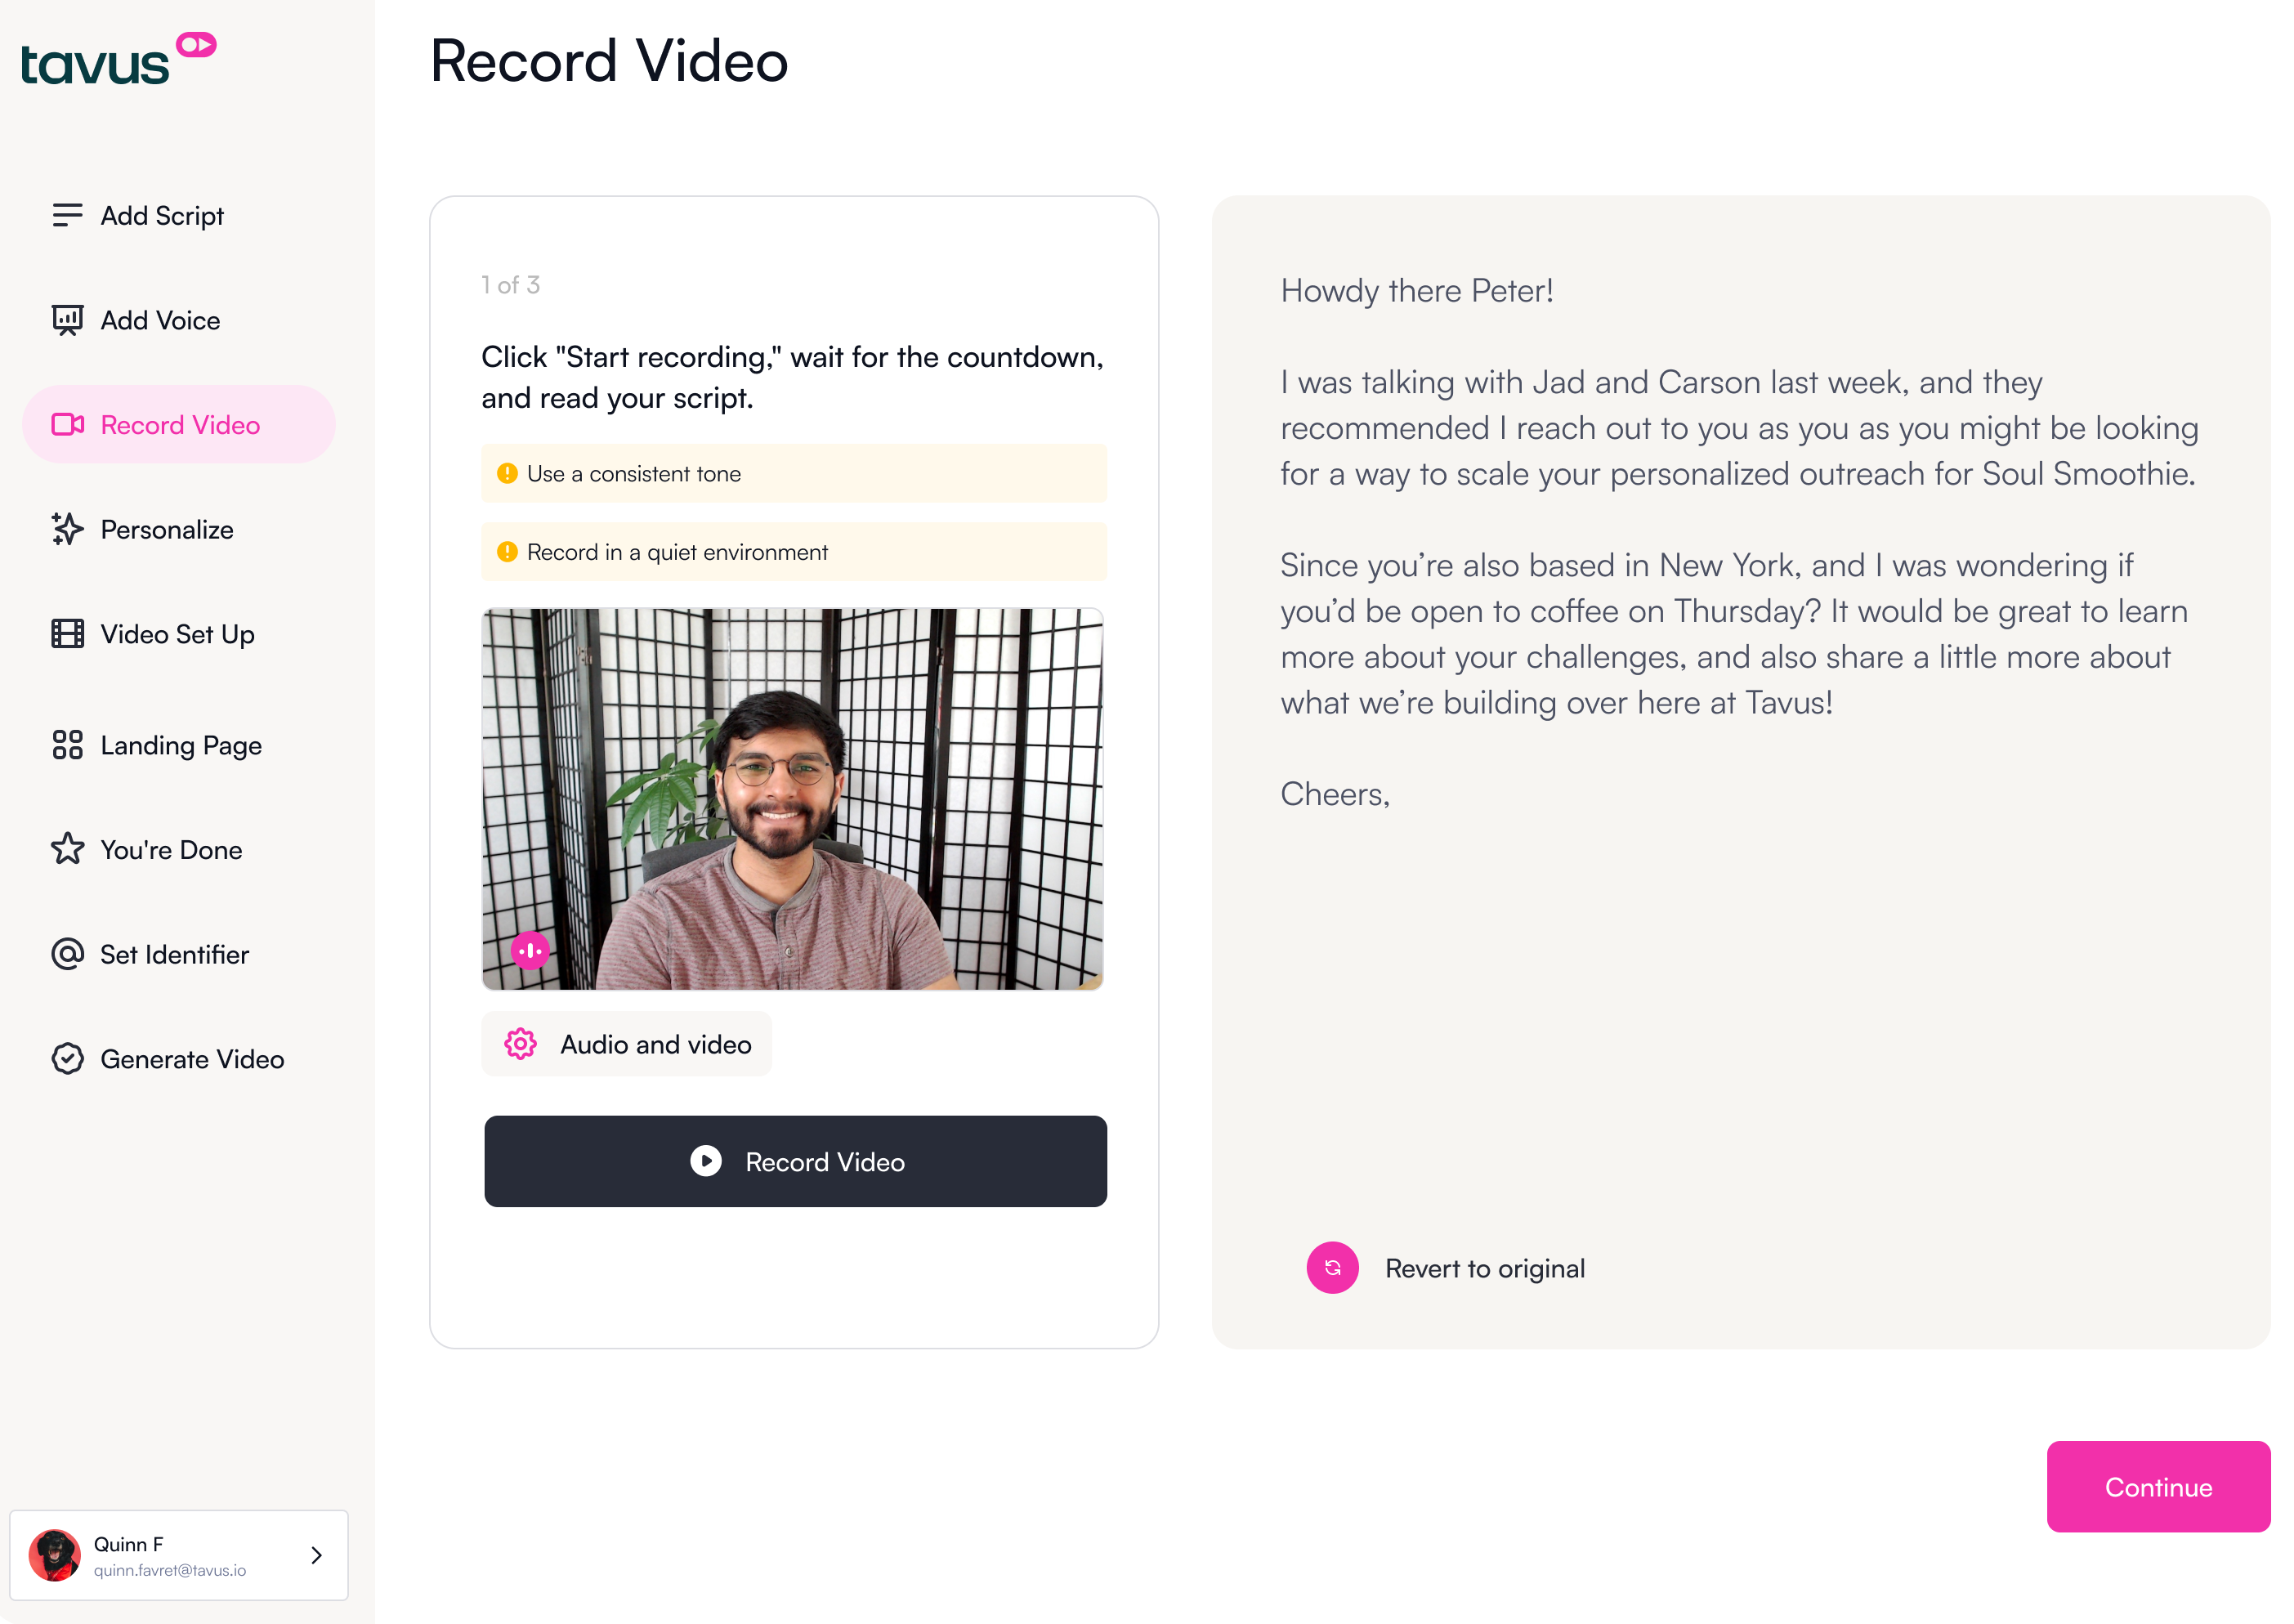 Tavus taps generative AI to power personalized videos with voice and face cloning